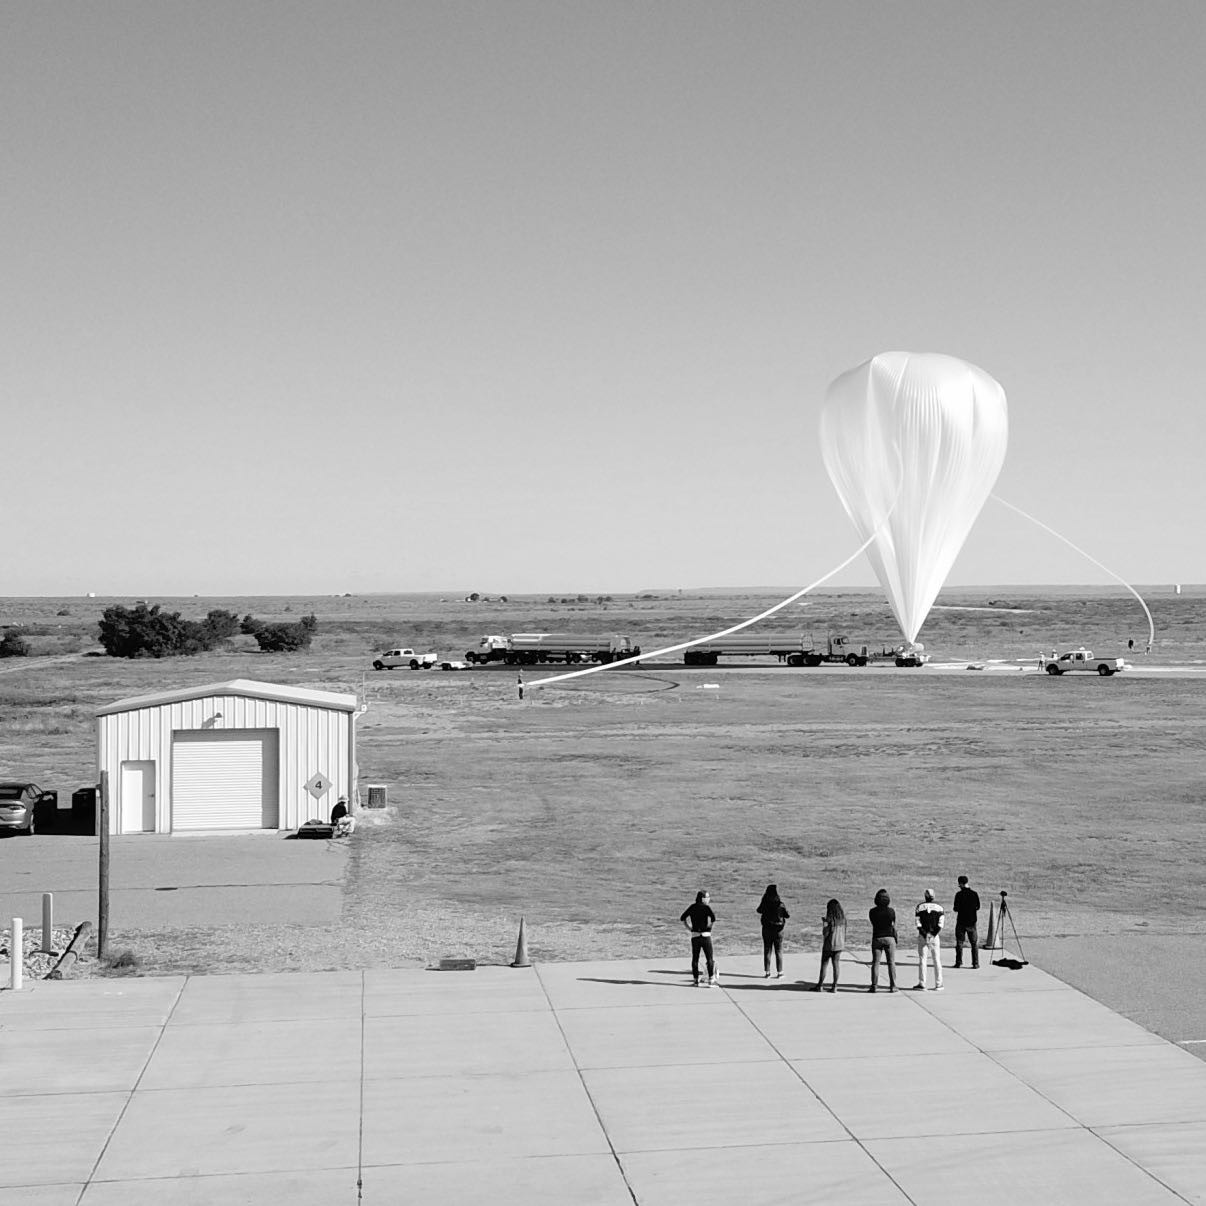 Image of FIREBall's balloon at it's 2018 launch site.